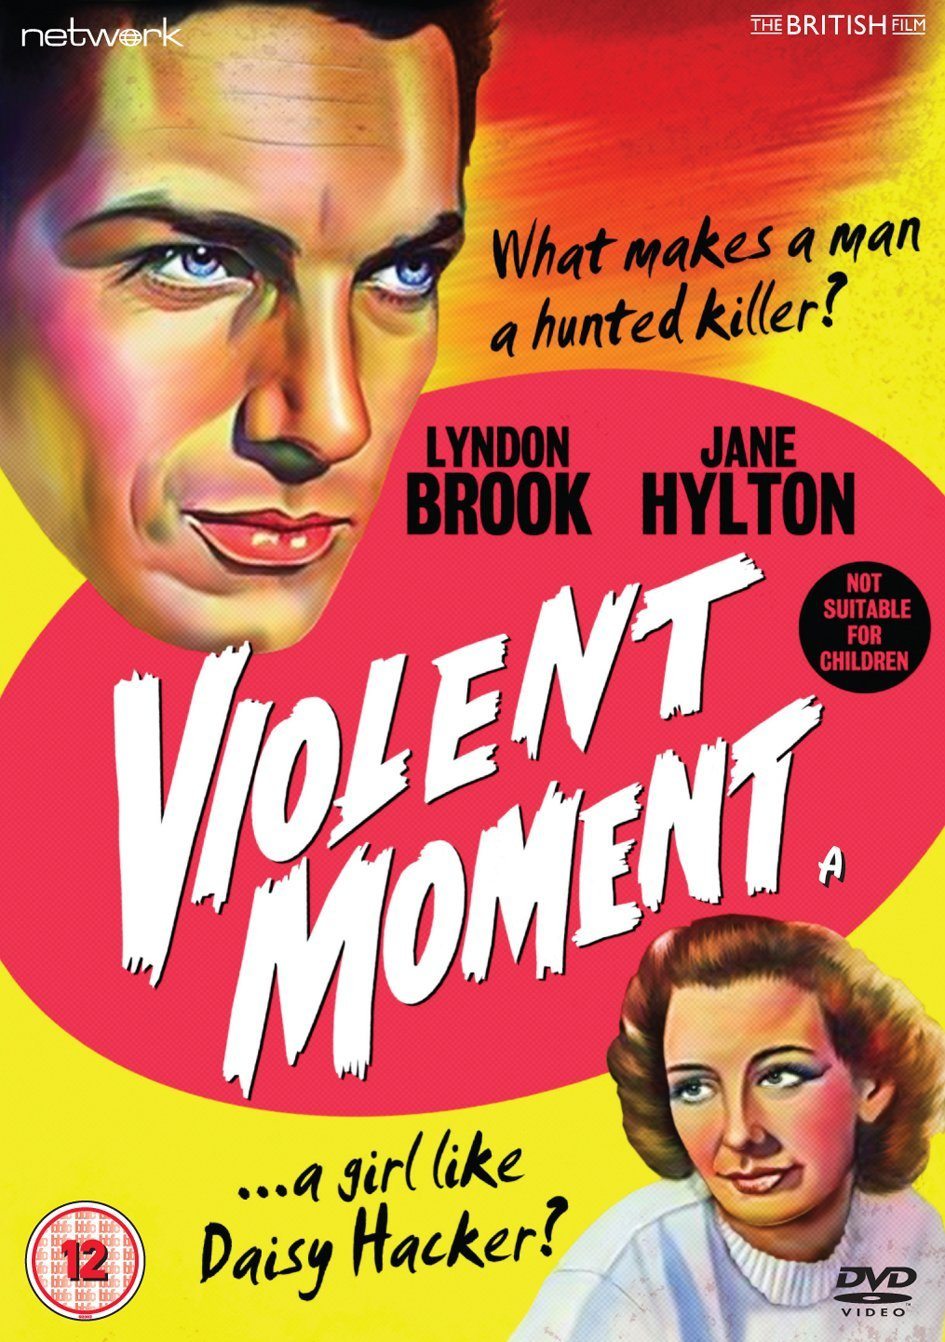 Violent Moment DVD from Network and the British Film.  Features Lyndon Brook and Jane Hylton